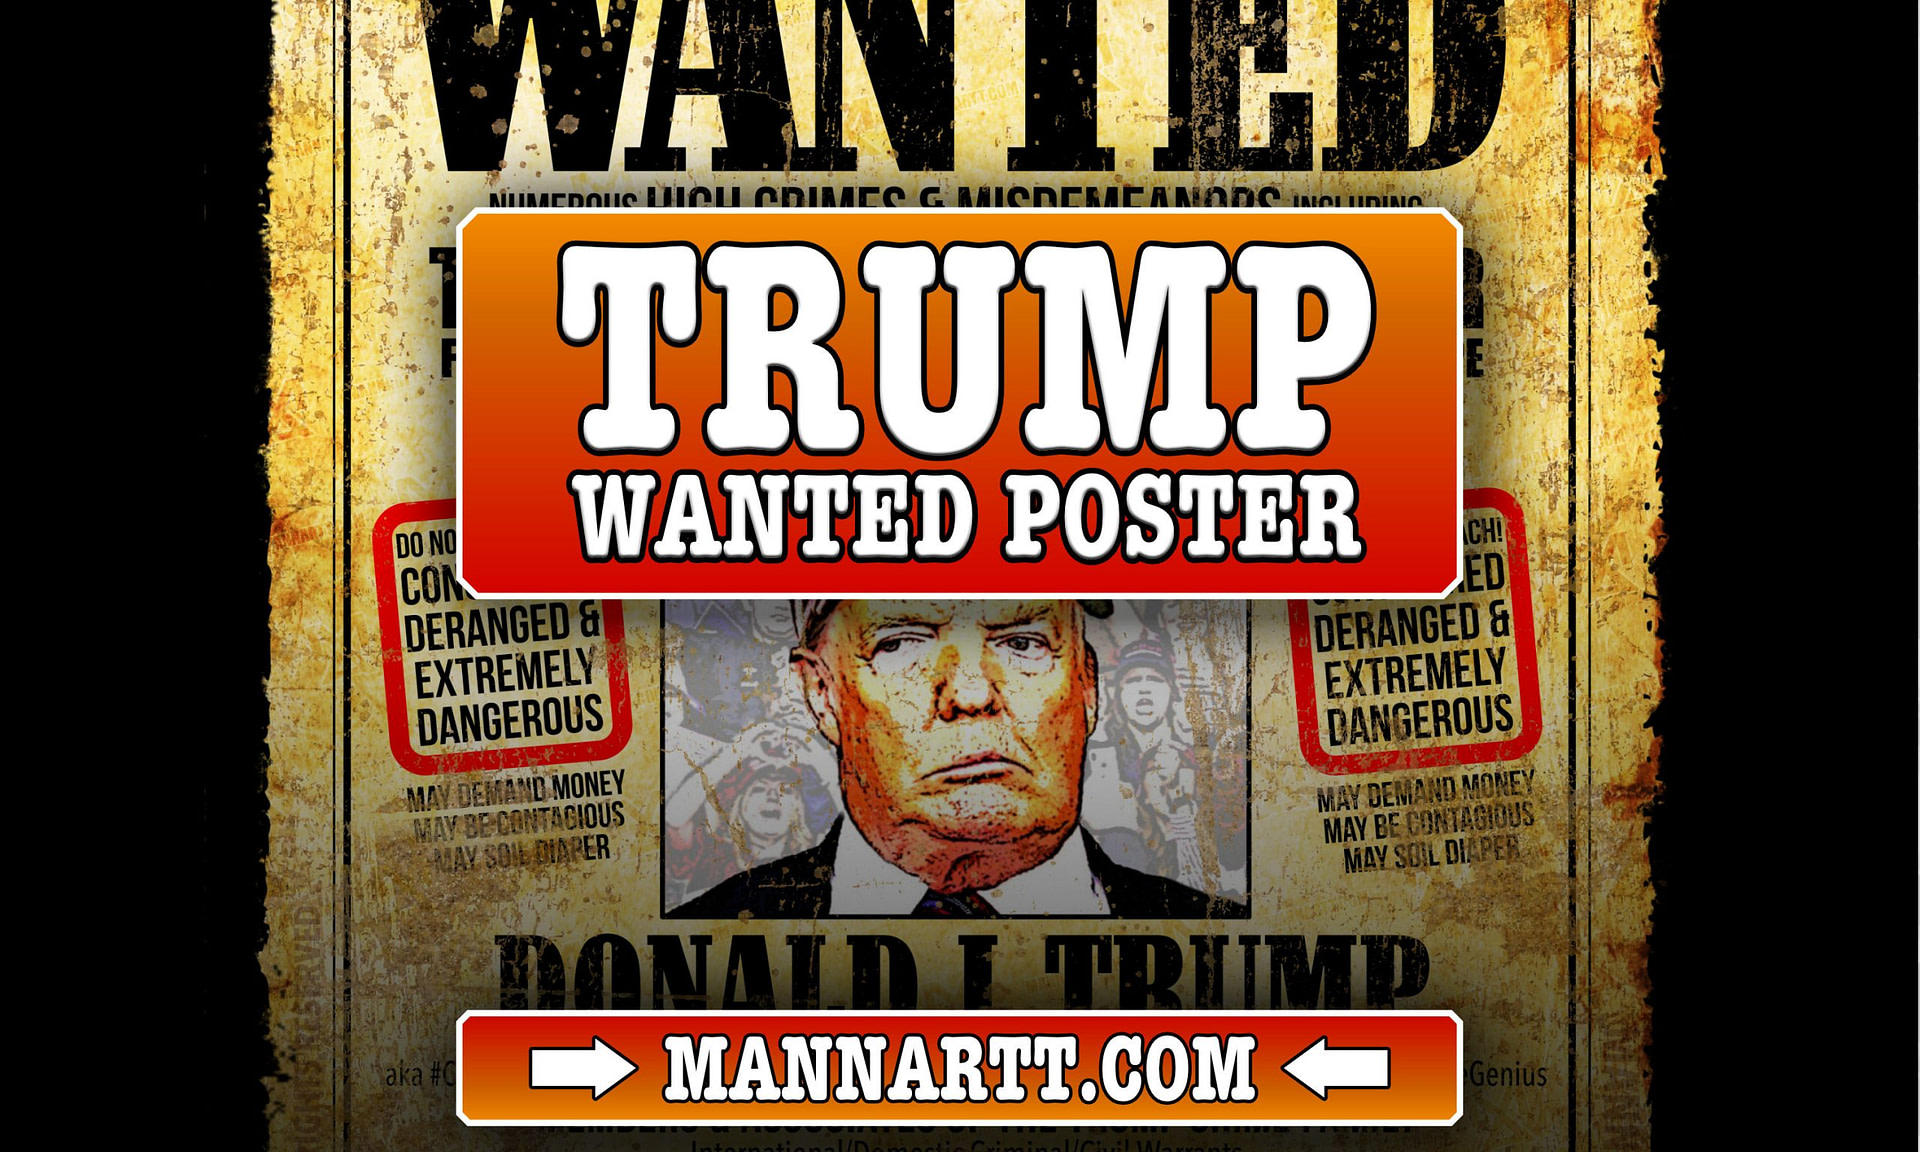 Teaser art for ANTI TRUMP POSTER / DONALD TRUMP POSTER / FUNNY OLD WEST WANTED POSTER - featured art..